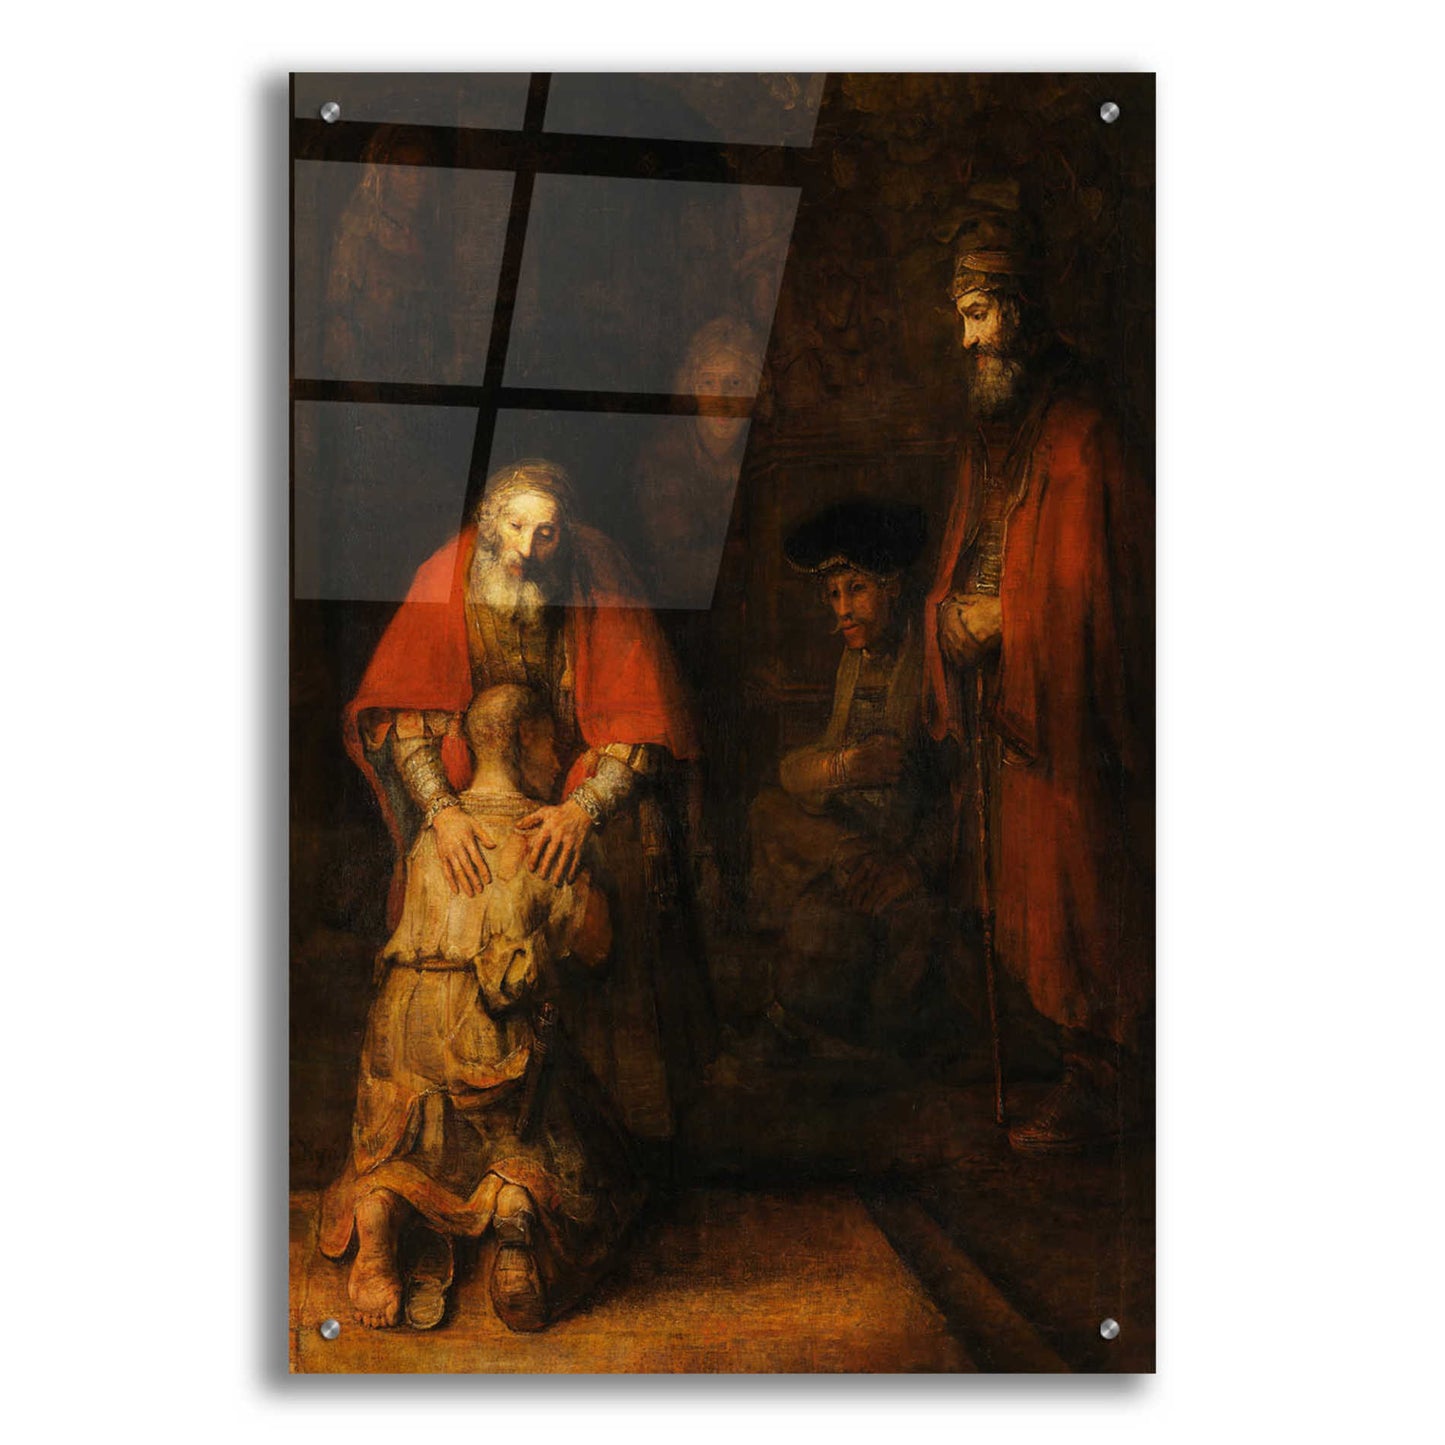 Epic Art 'The Return of the Prodigal Son' by Rembrandt, Acrylic Glass Wall Art,24x36